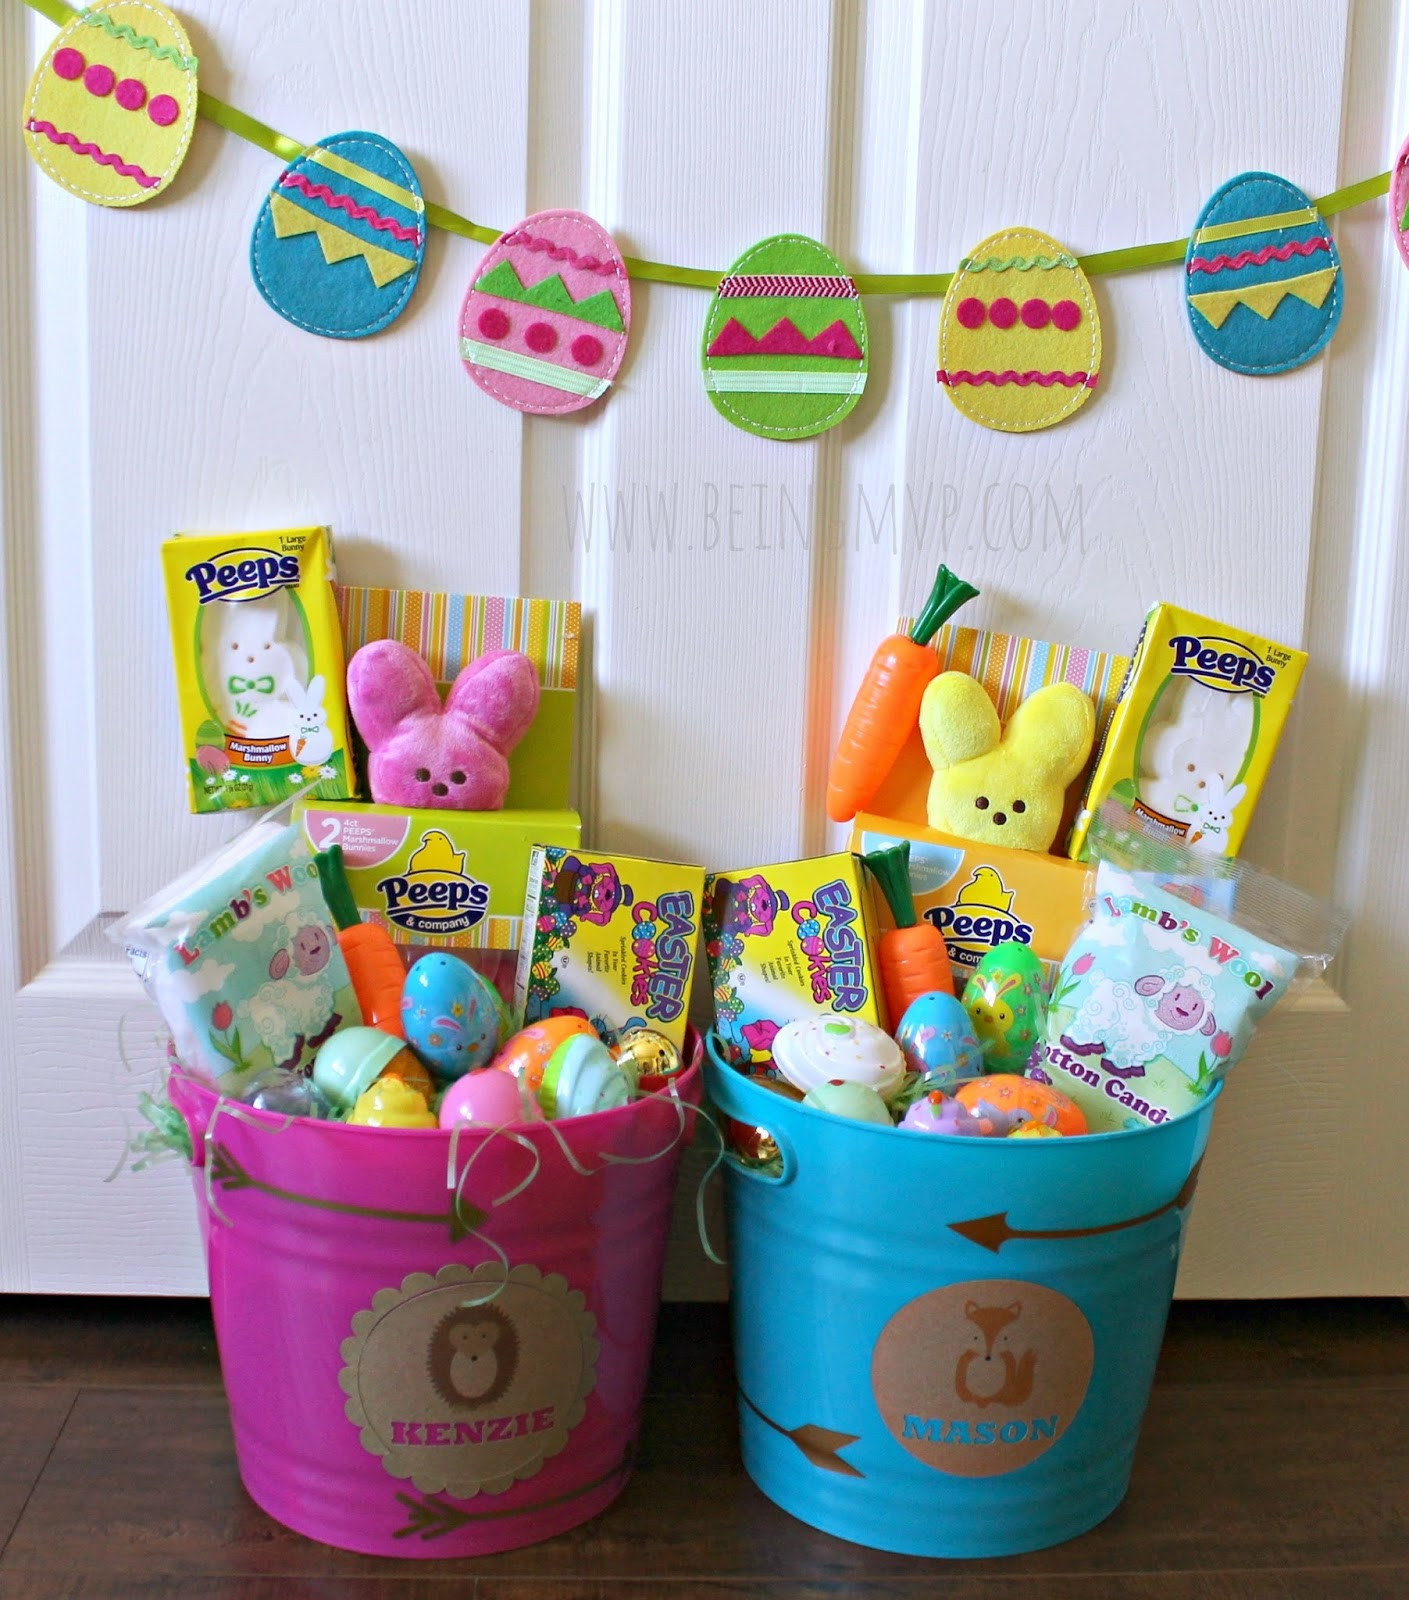 DIY Easter Basket Ideas For Toddlers
 being MVP Easter Basket Ideas for Little Kids